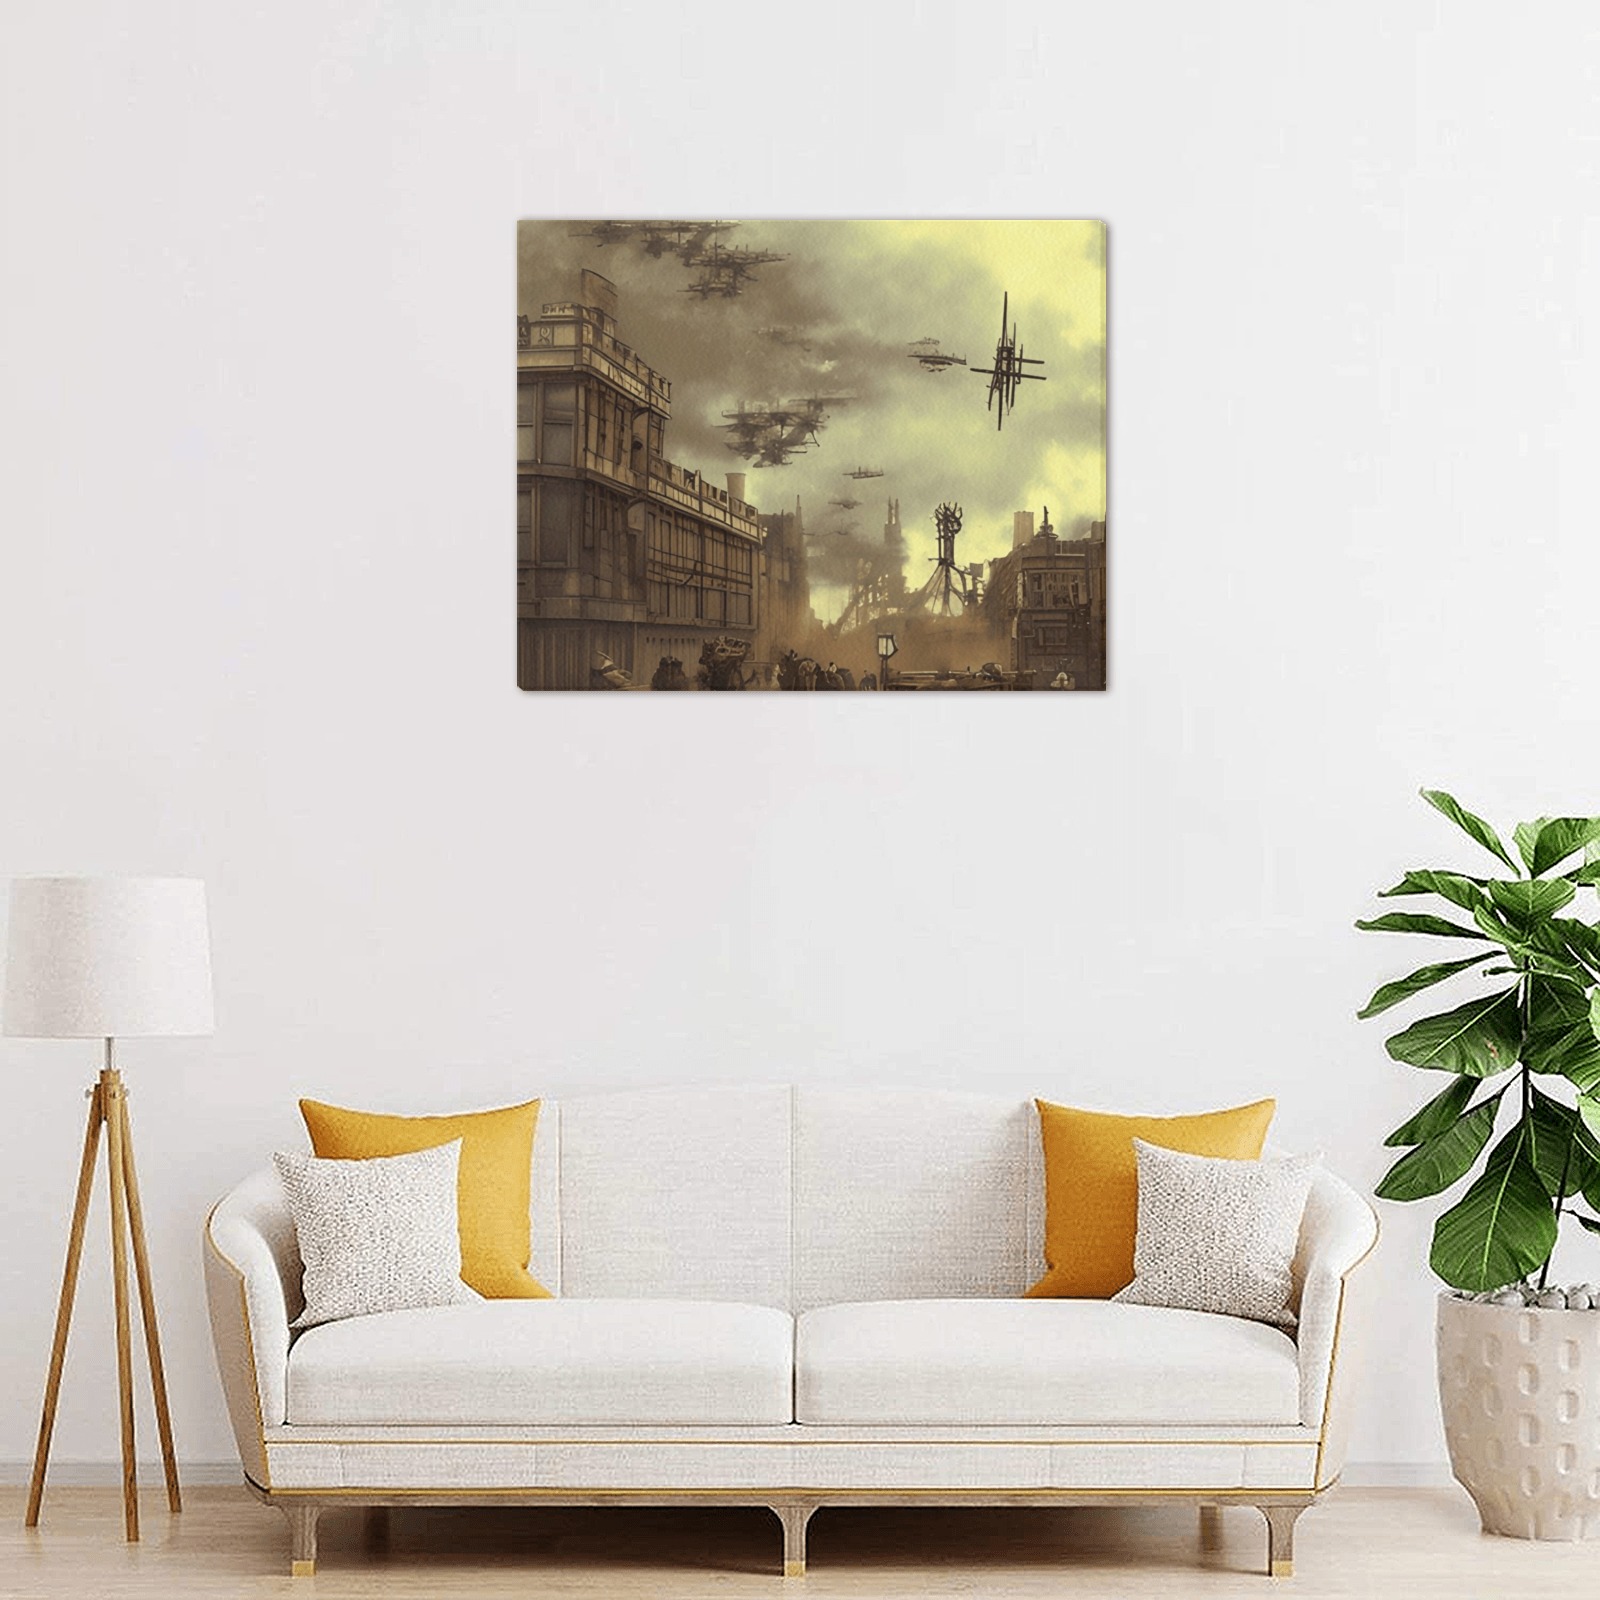 BATTLE OVER LONDON 6 Upgraded Canvas Print 20"x16"